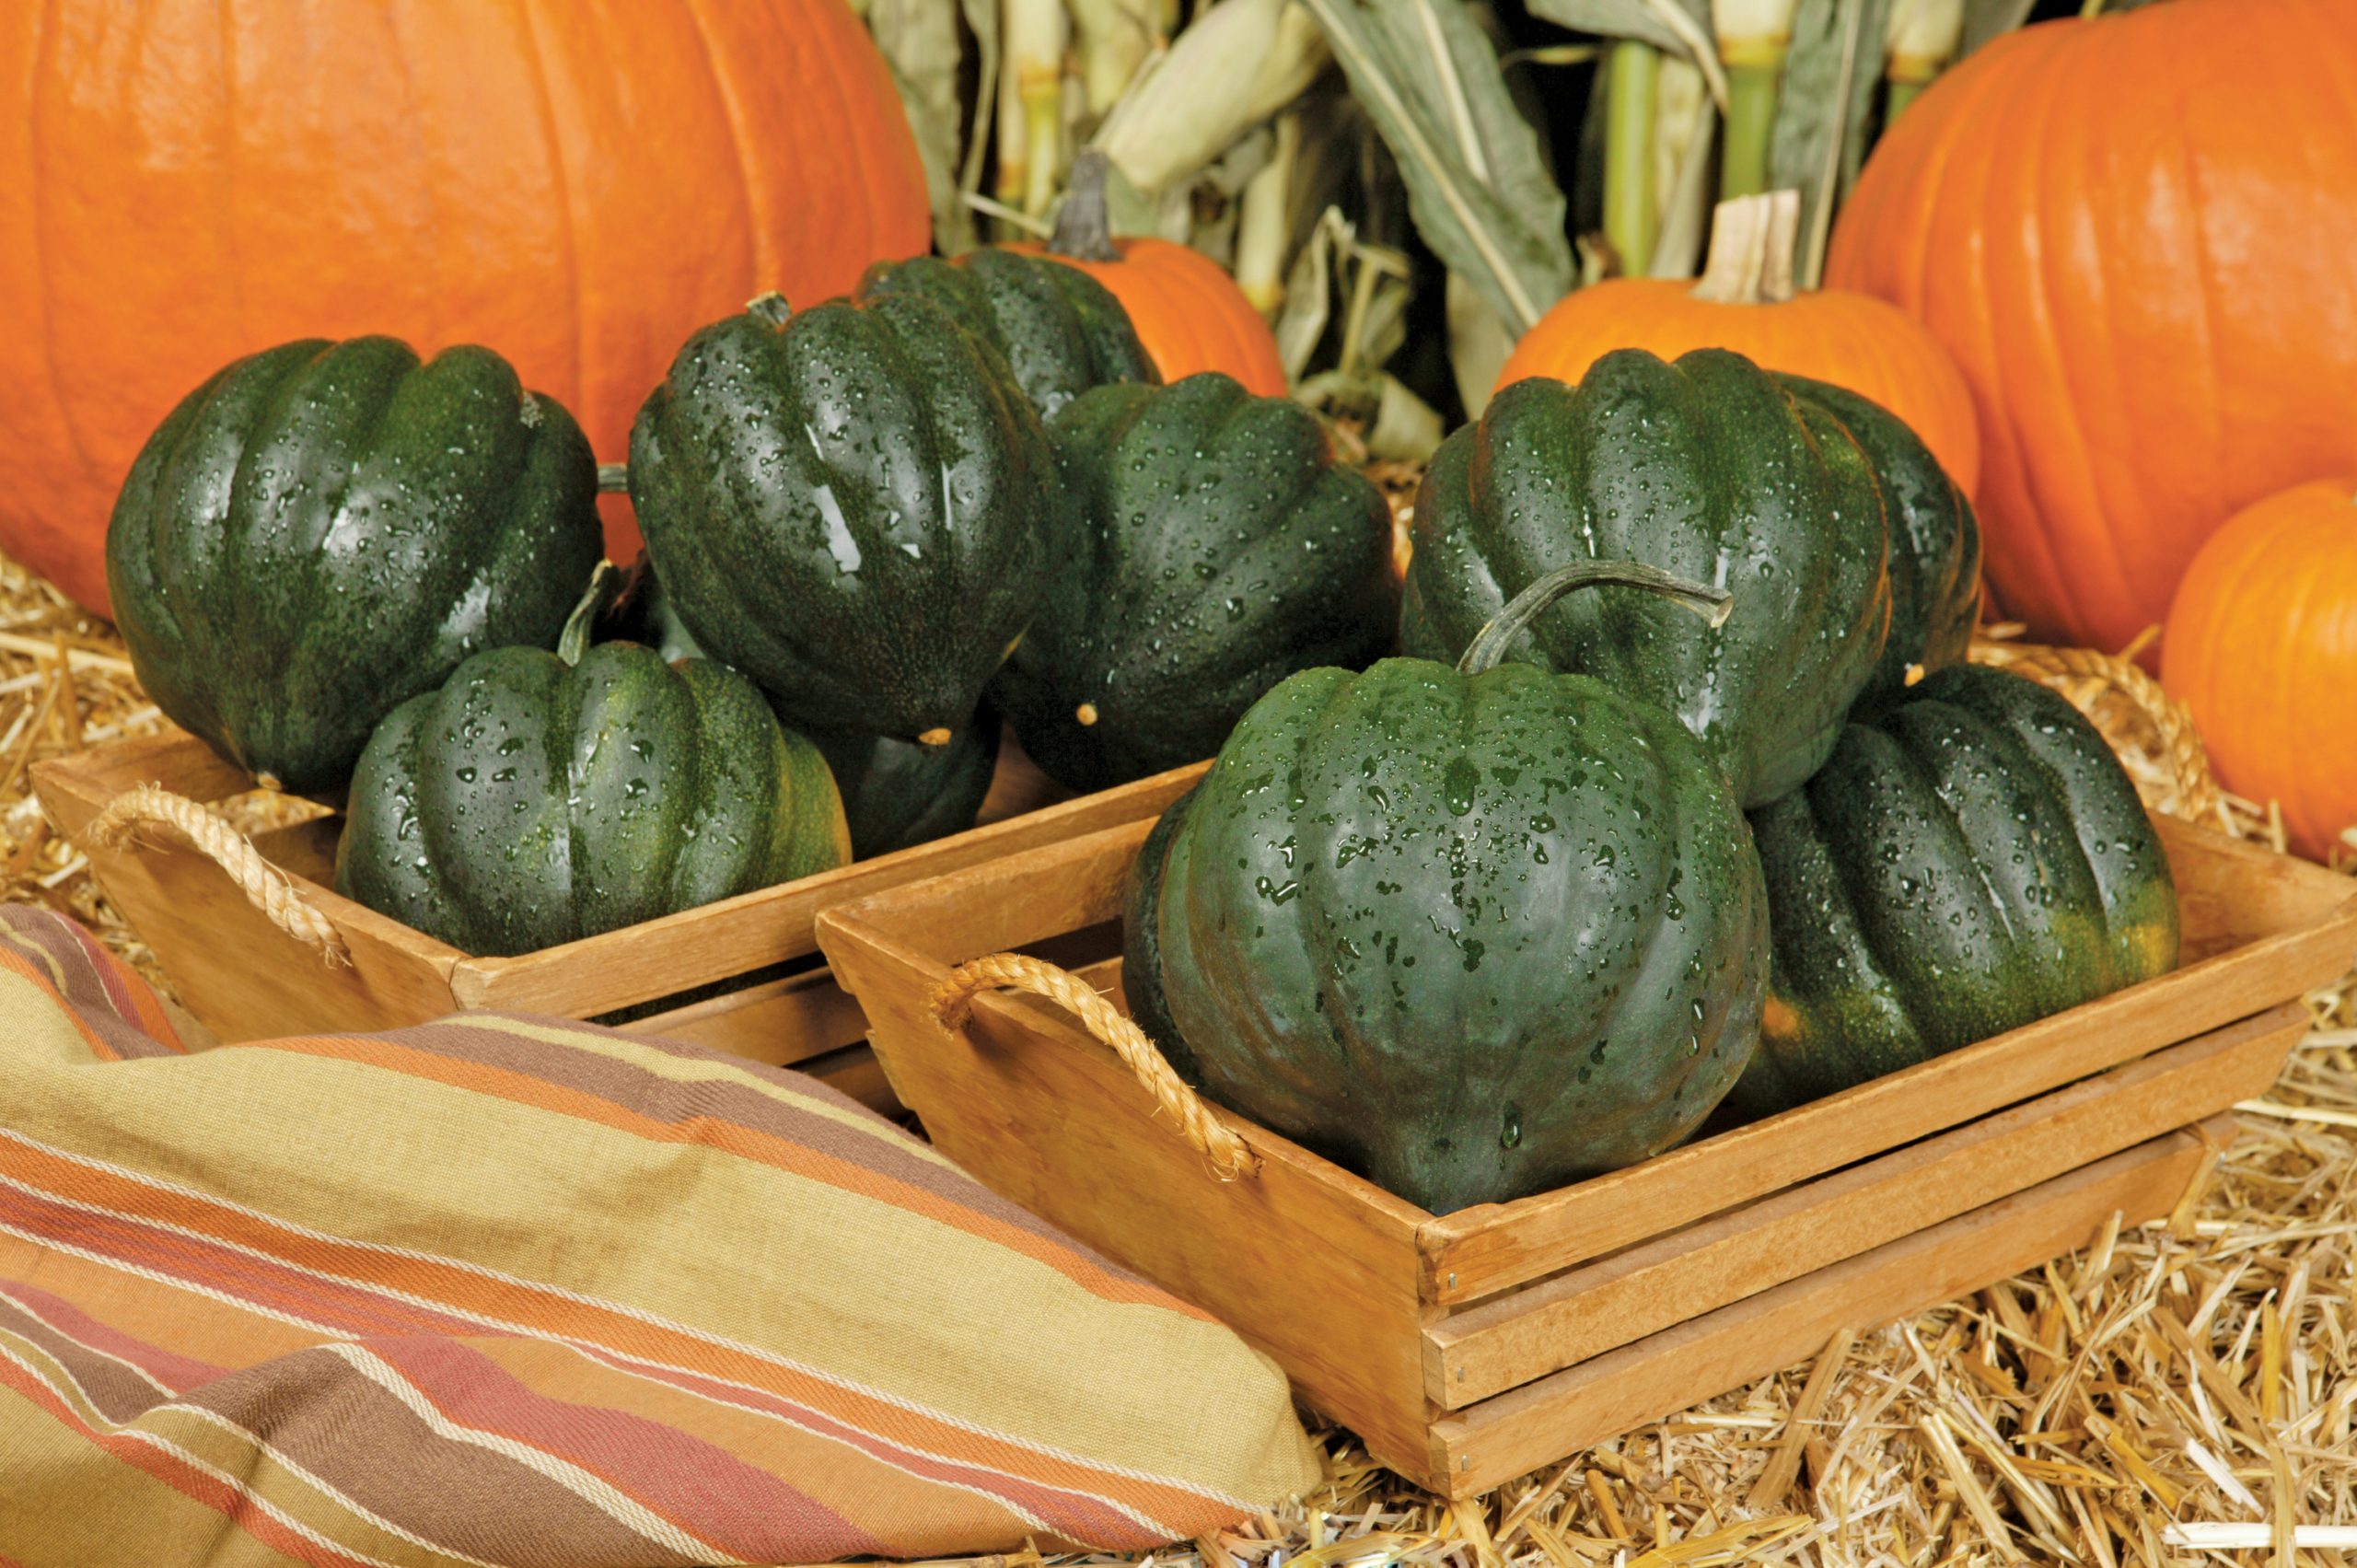 Baskets of Acorn Squash on Hay Food Picture